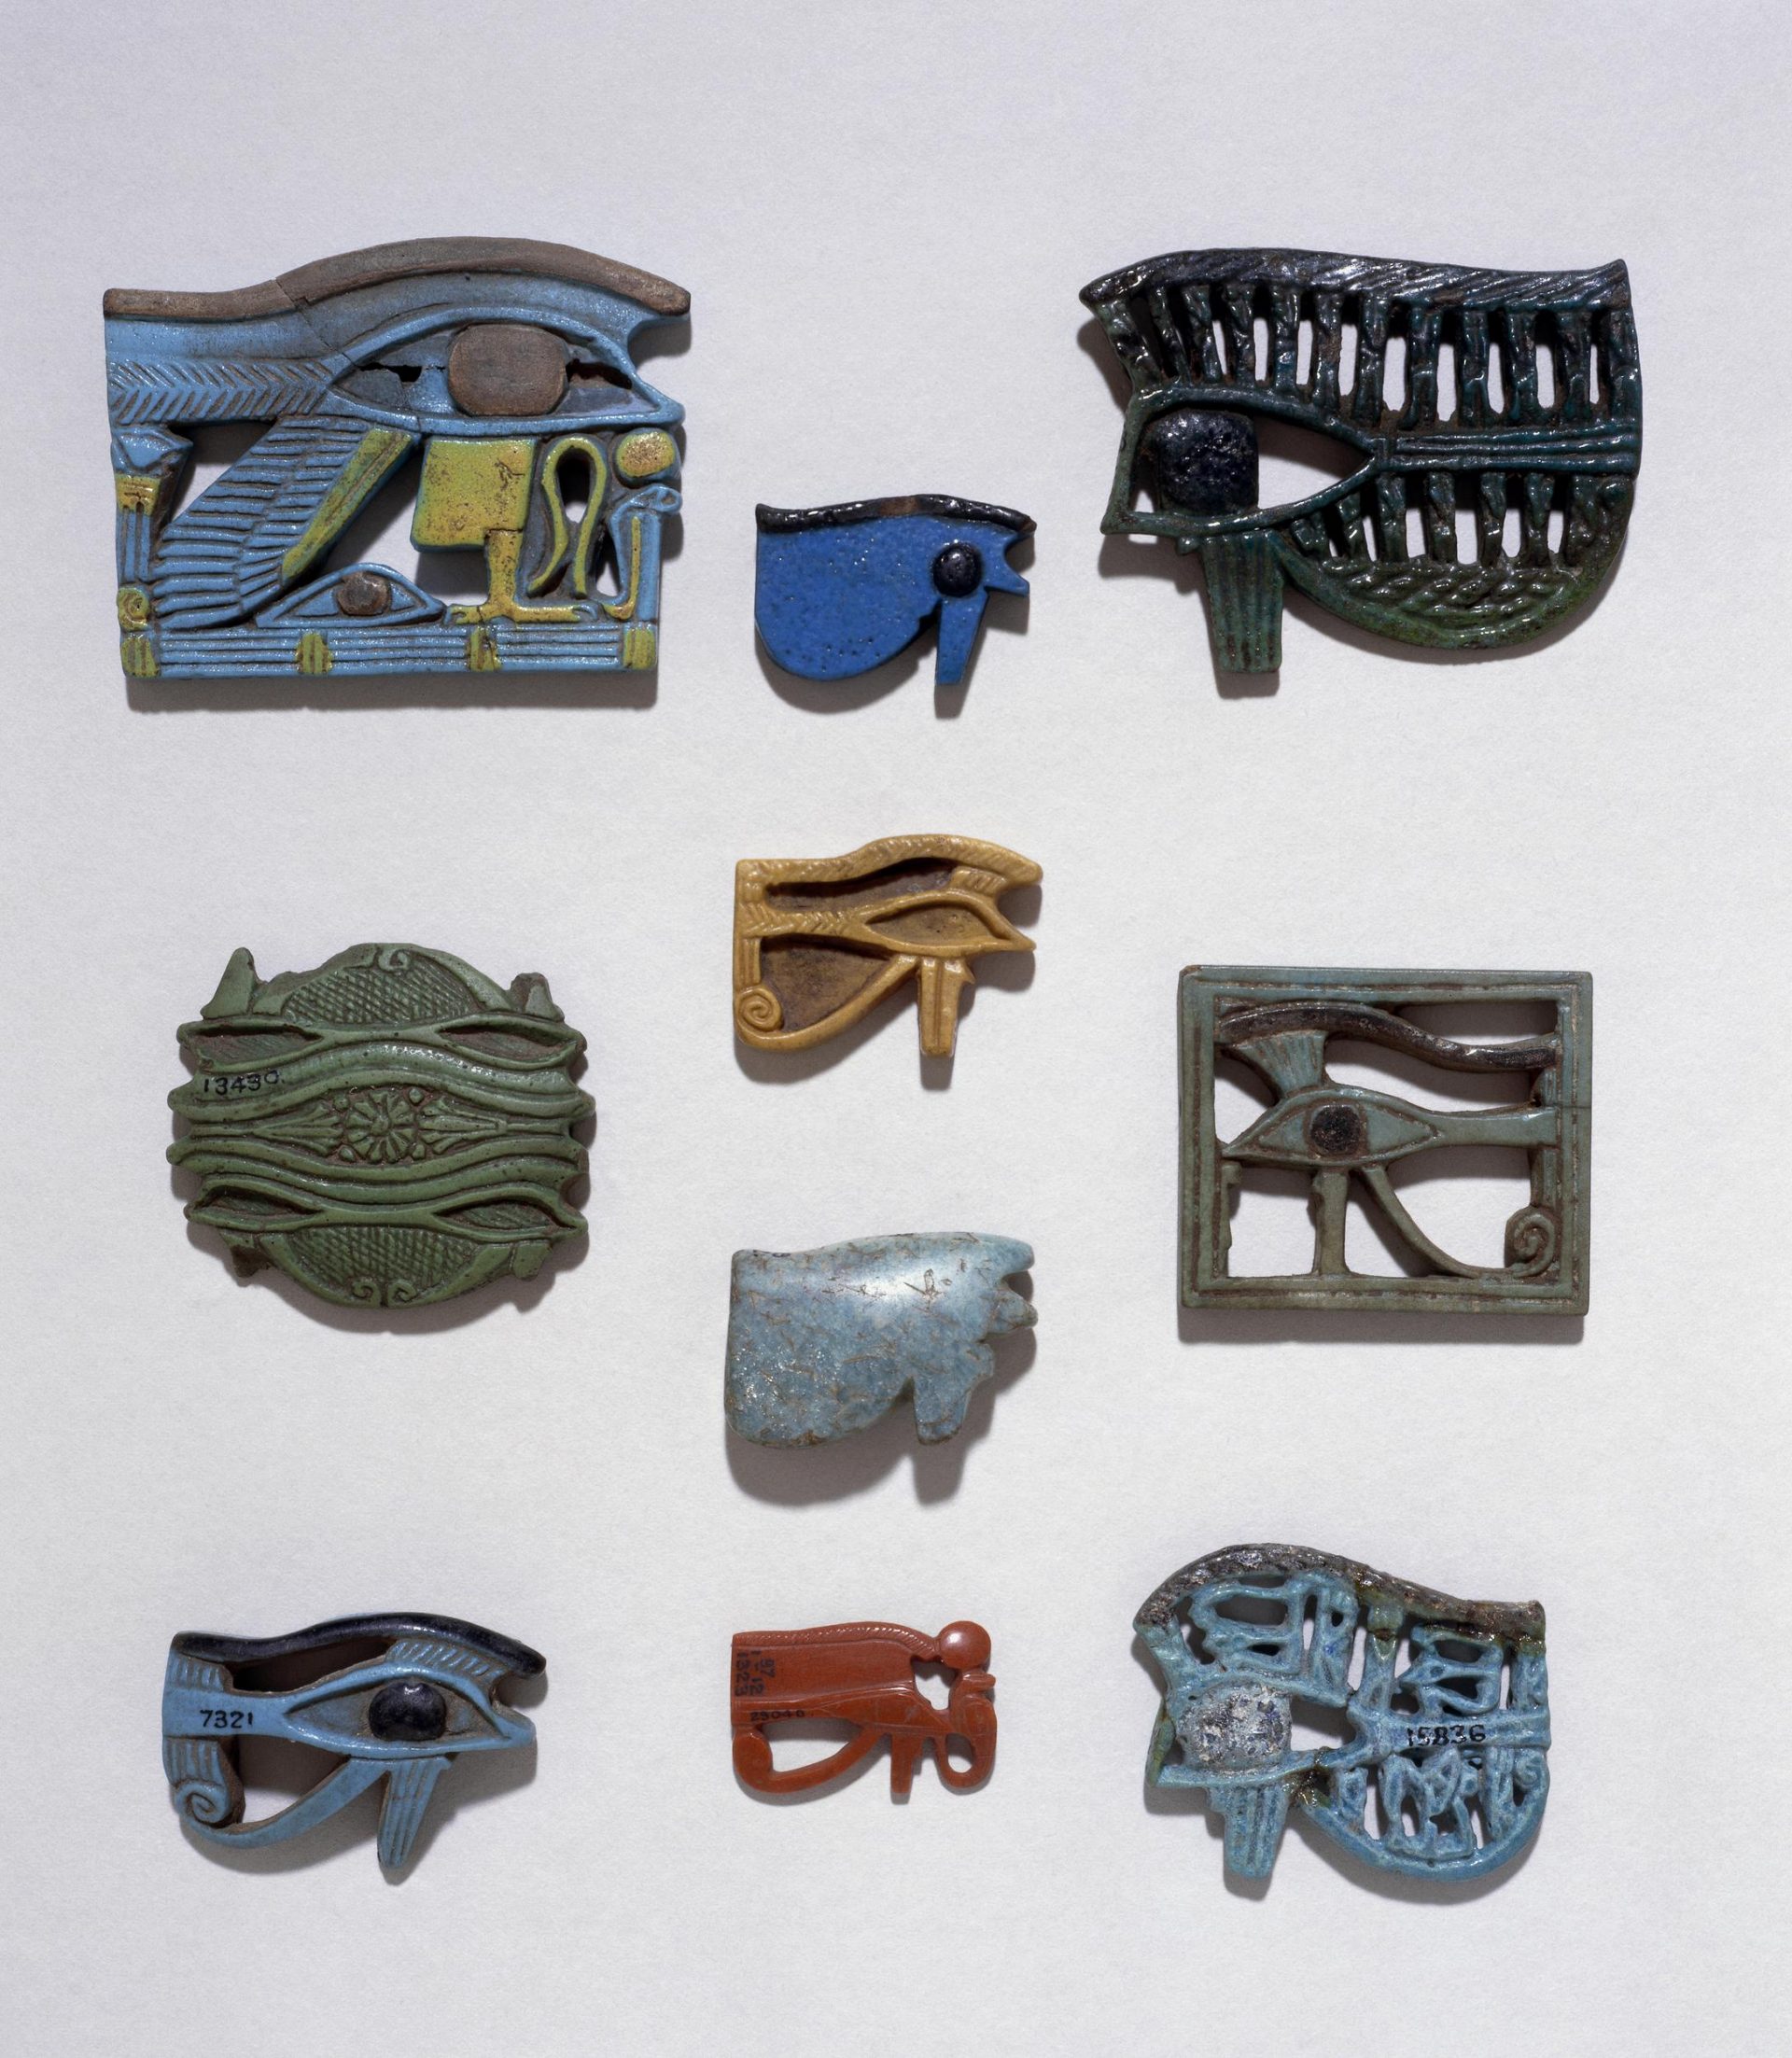 Multiple Wedjat Eye amulets from ancient Egypt